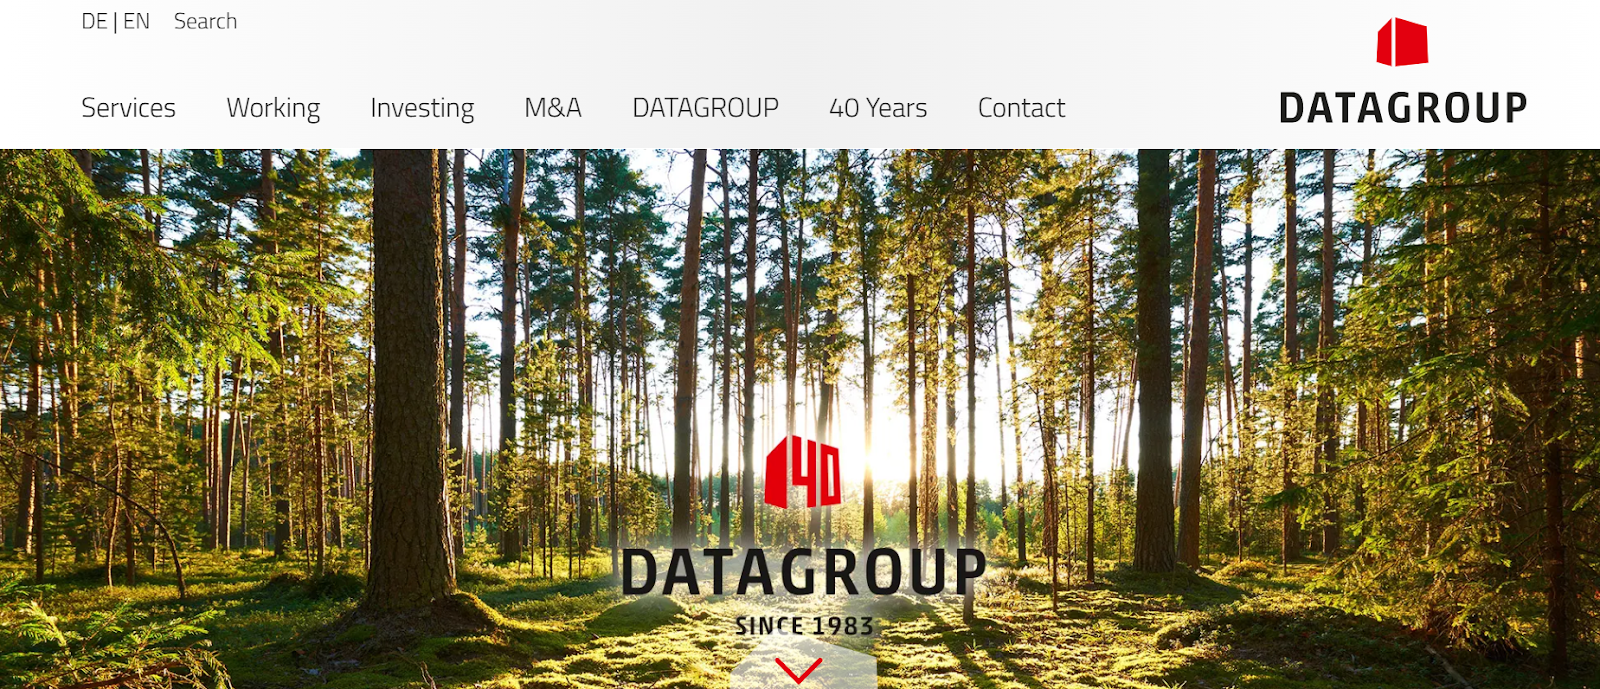 DataGroup website snapshot highlighting the services it offers.